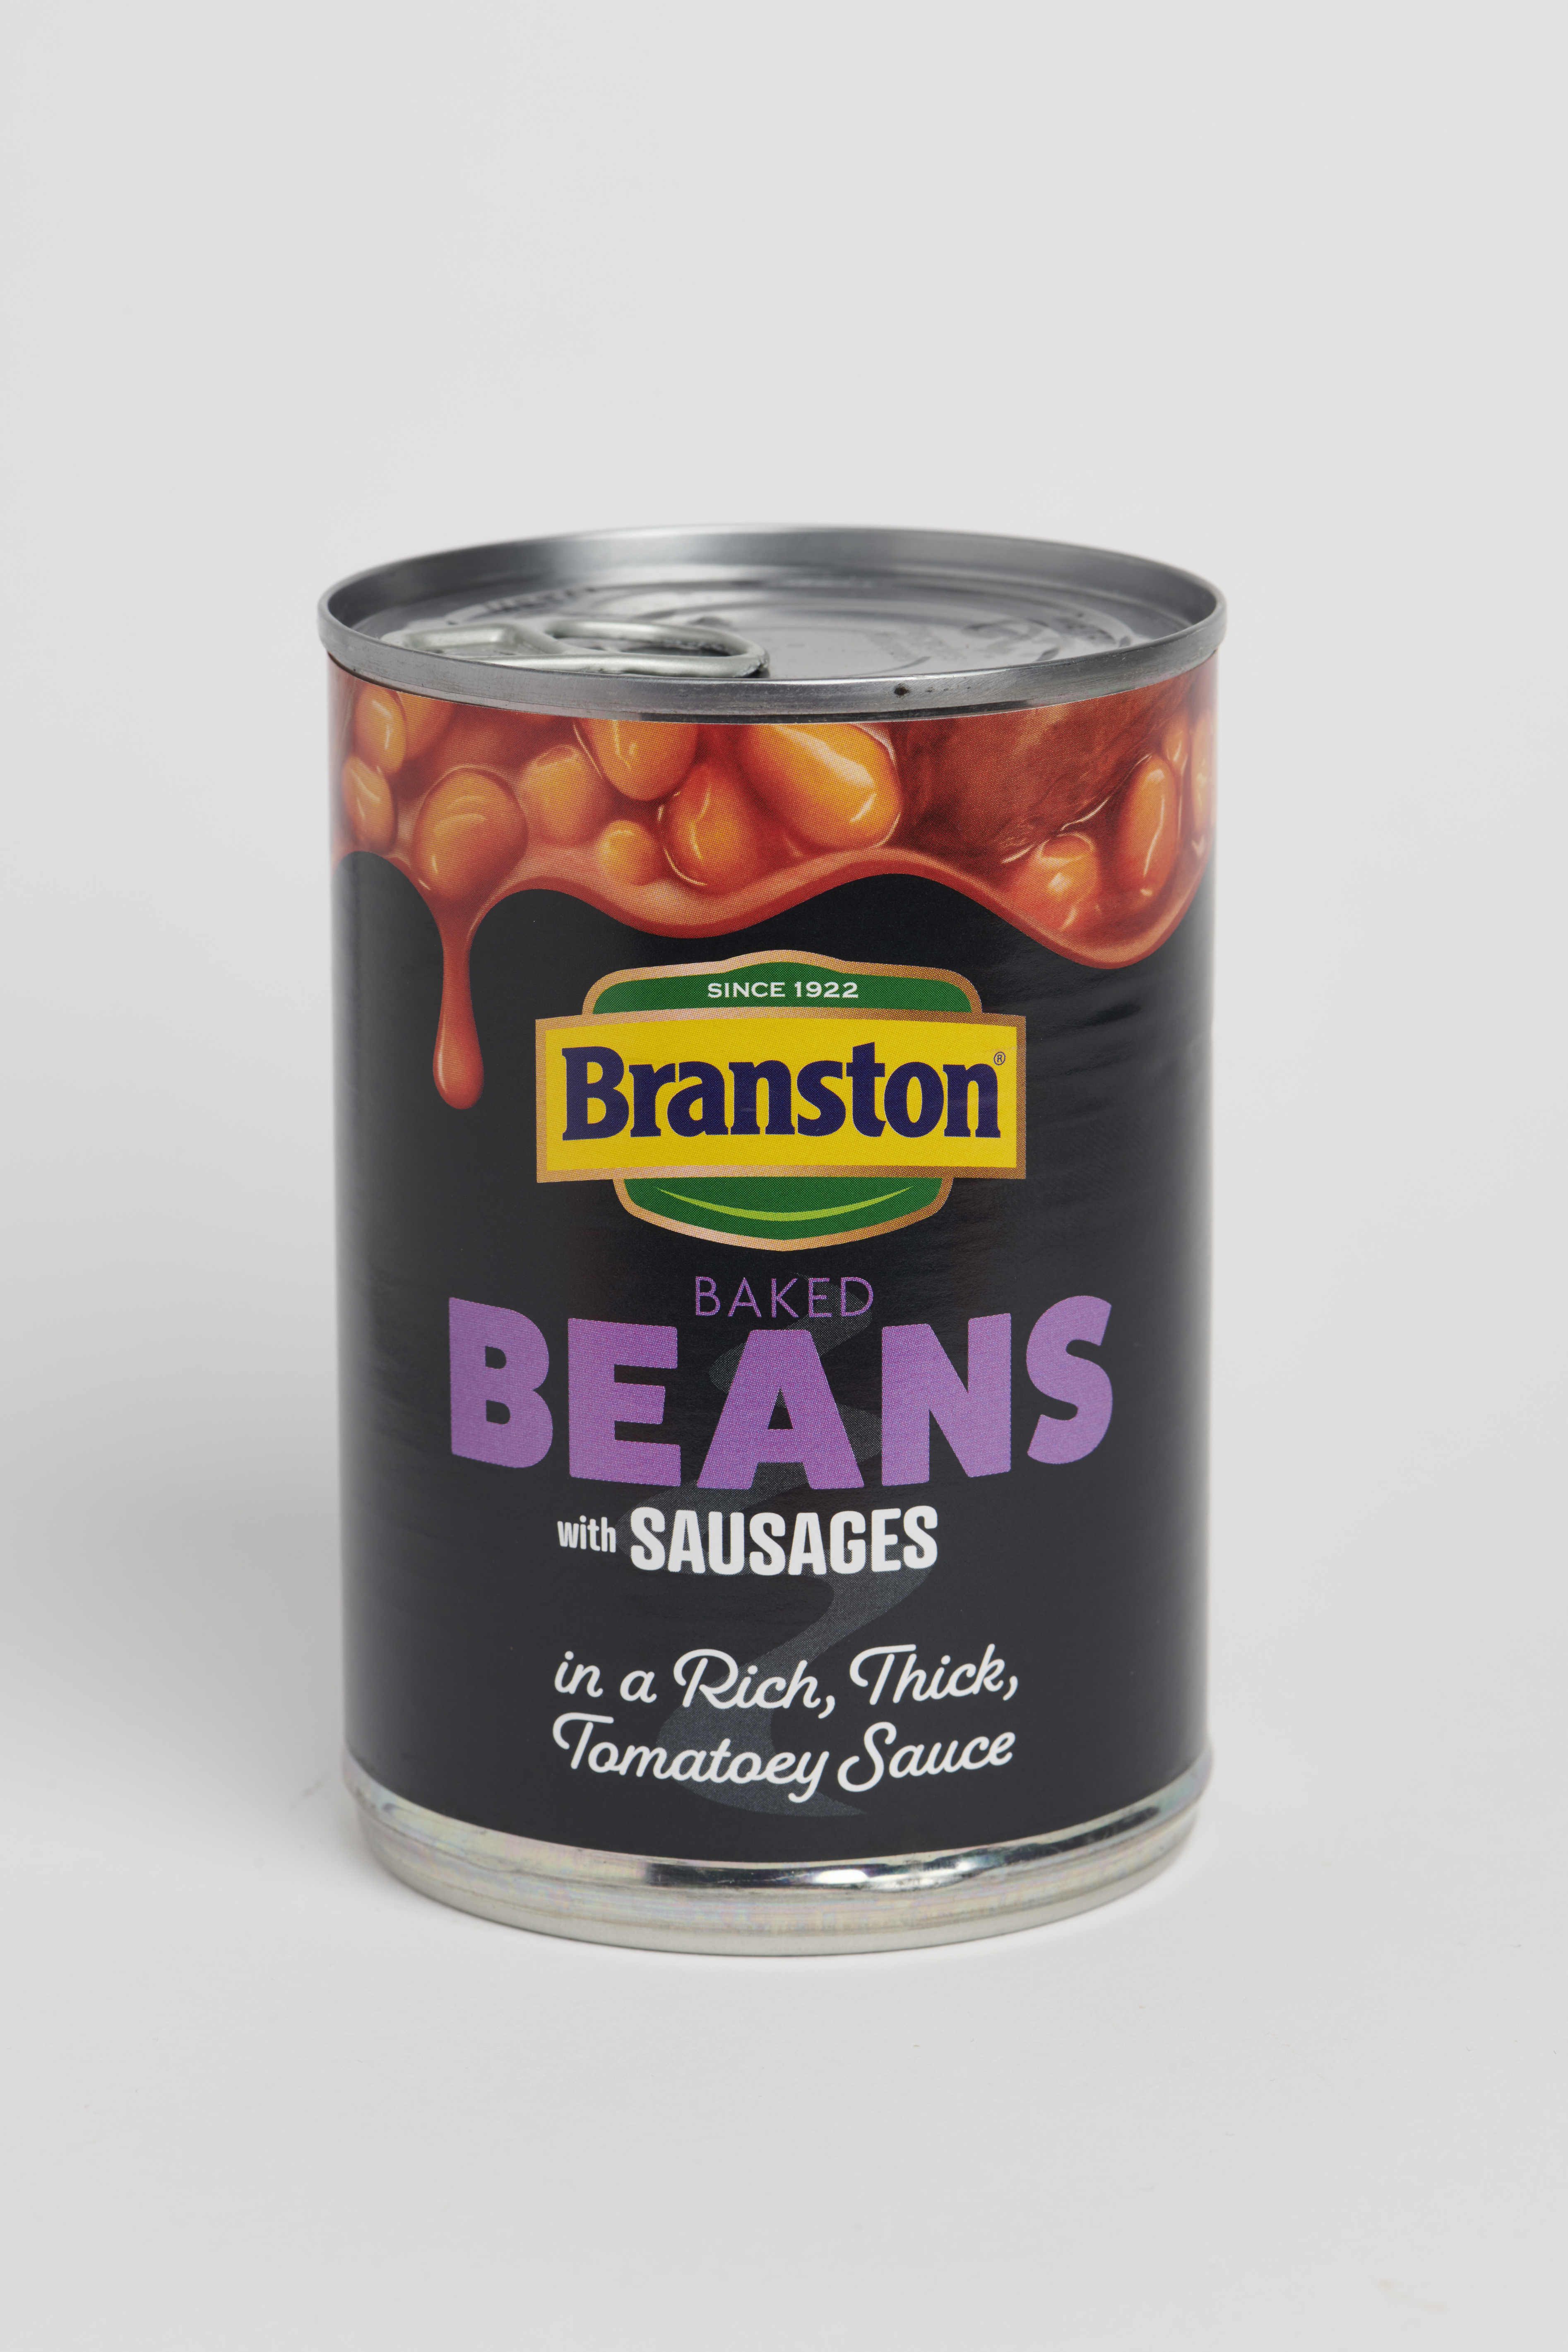 Lunch was easy, delicious and filling with these tinned beans